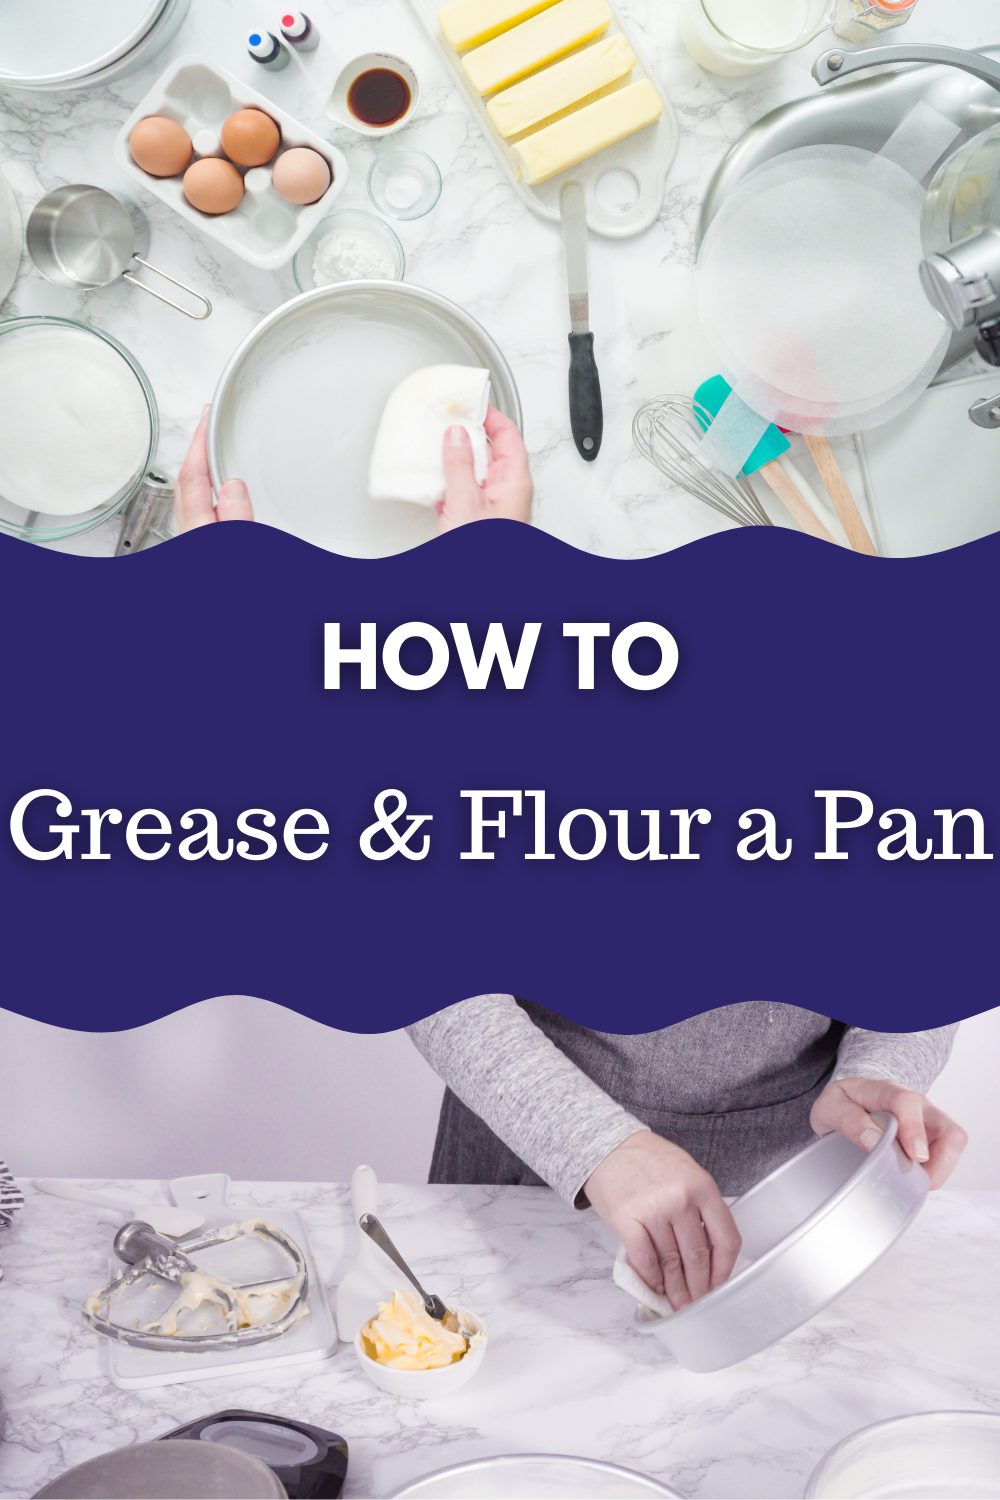 When it’s time to make a cake, it’s important to know how to grease and flour a pan properly. These helpful tips using a variety of ingredients will give you lots of choices when it comes to prepping your cake pan before creating the world’s tastiest cake.  Full tutorial and tips available on our site! via @jennymelrose